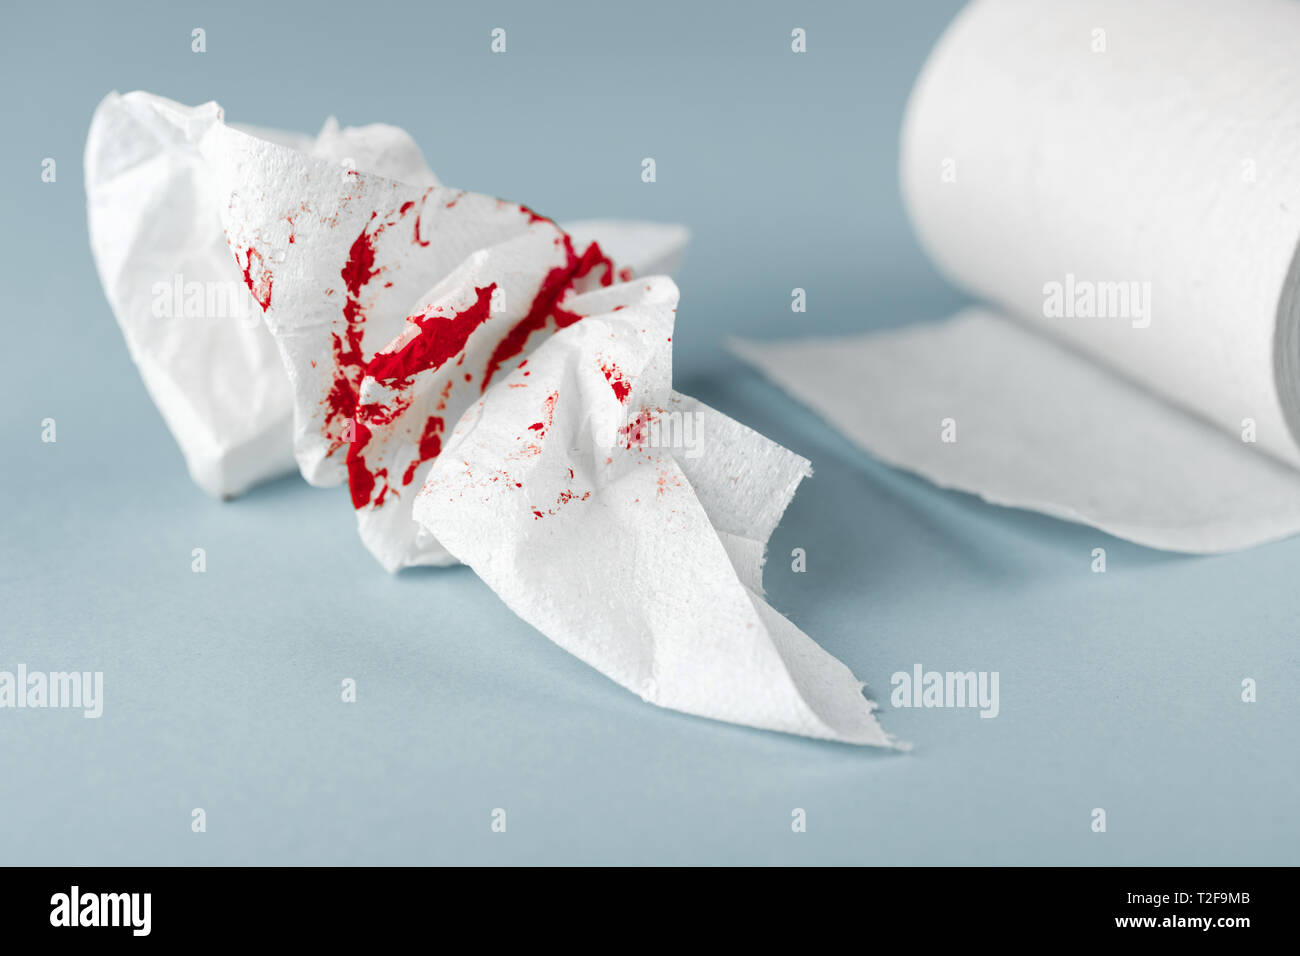 A photo of used bloody toilet paper and a toilet paper roll on the light blue background. Menstrual or hemorrhoids bleeding Stock Photo